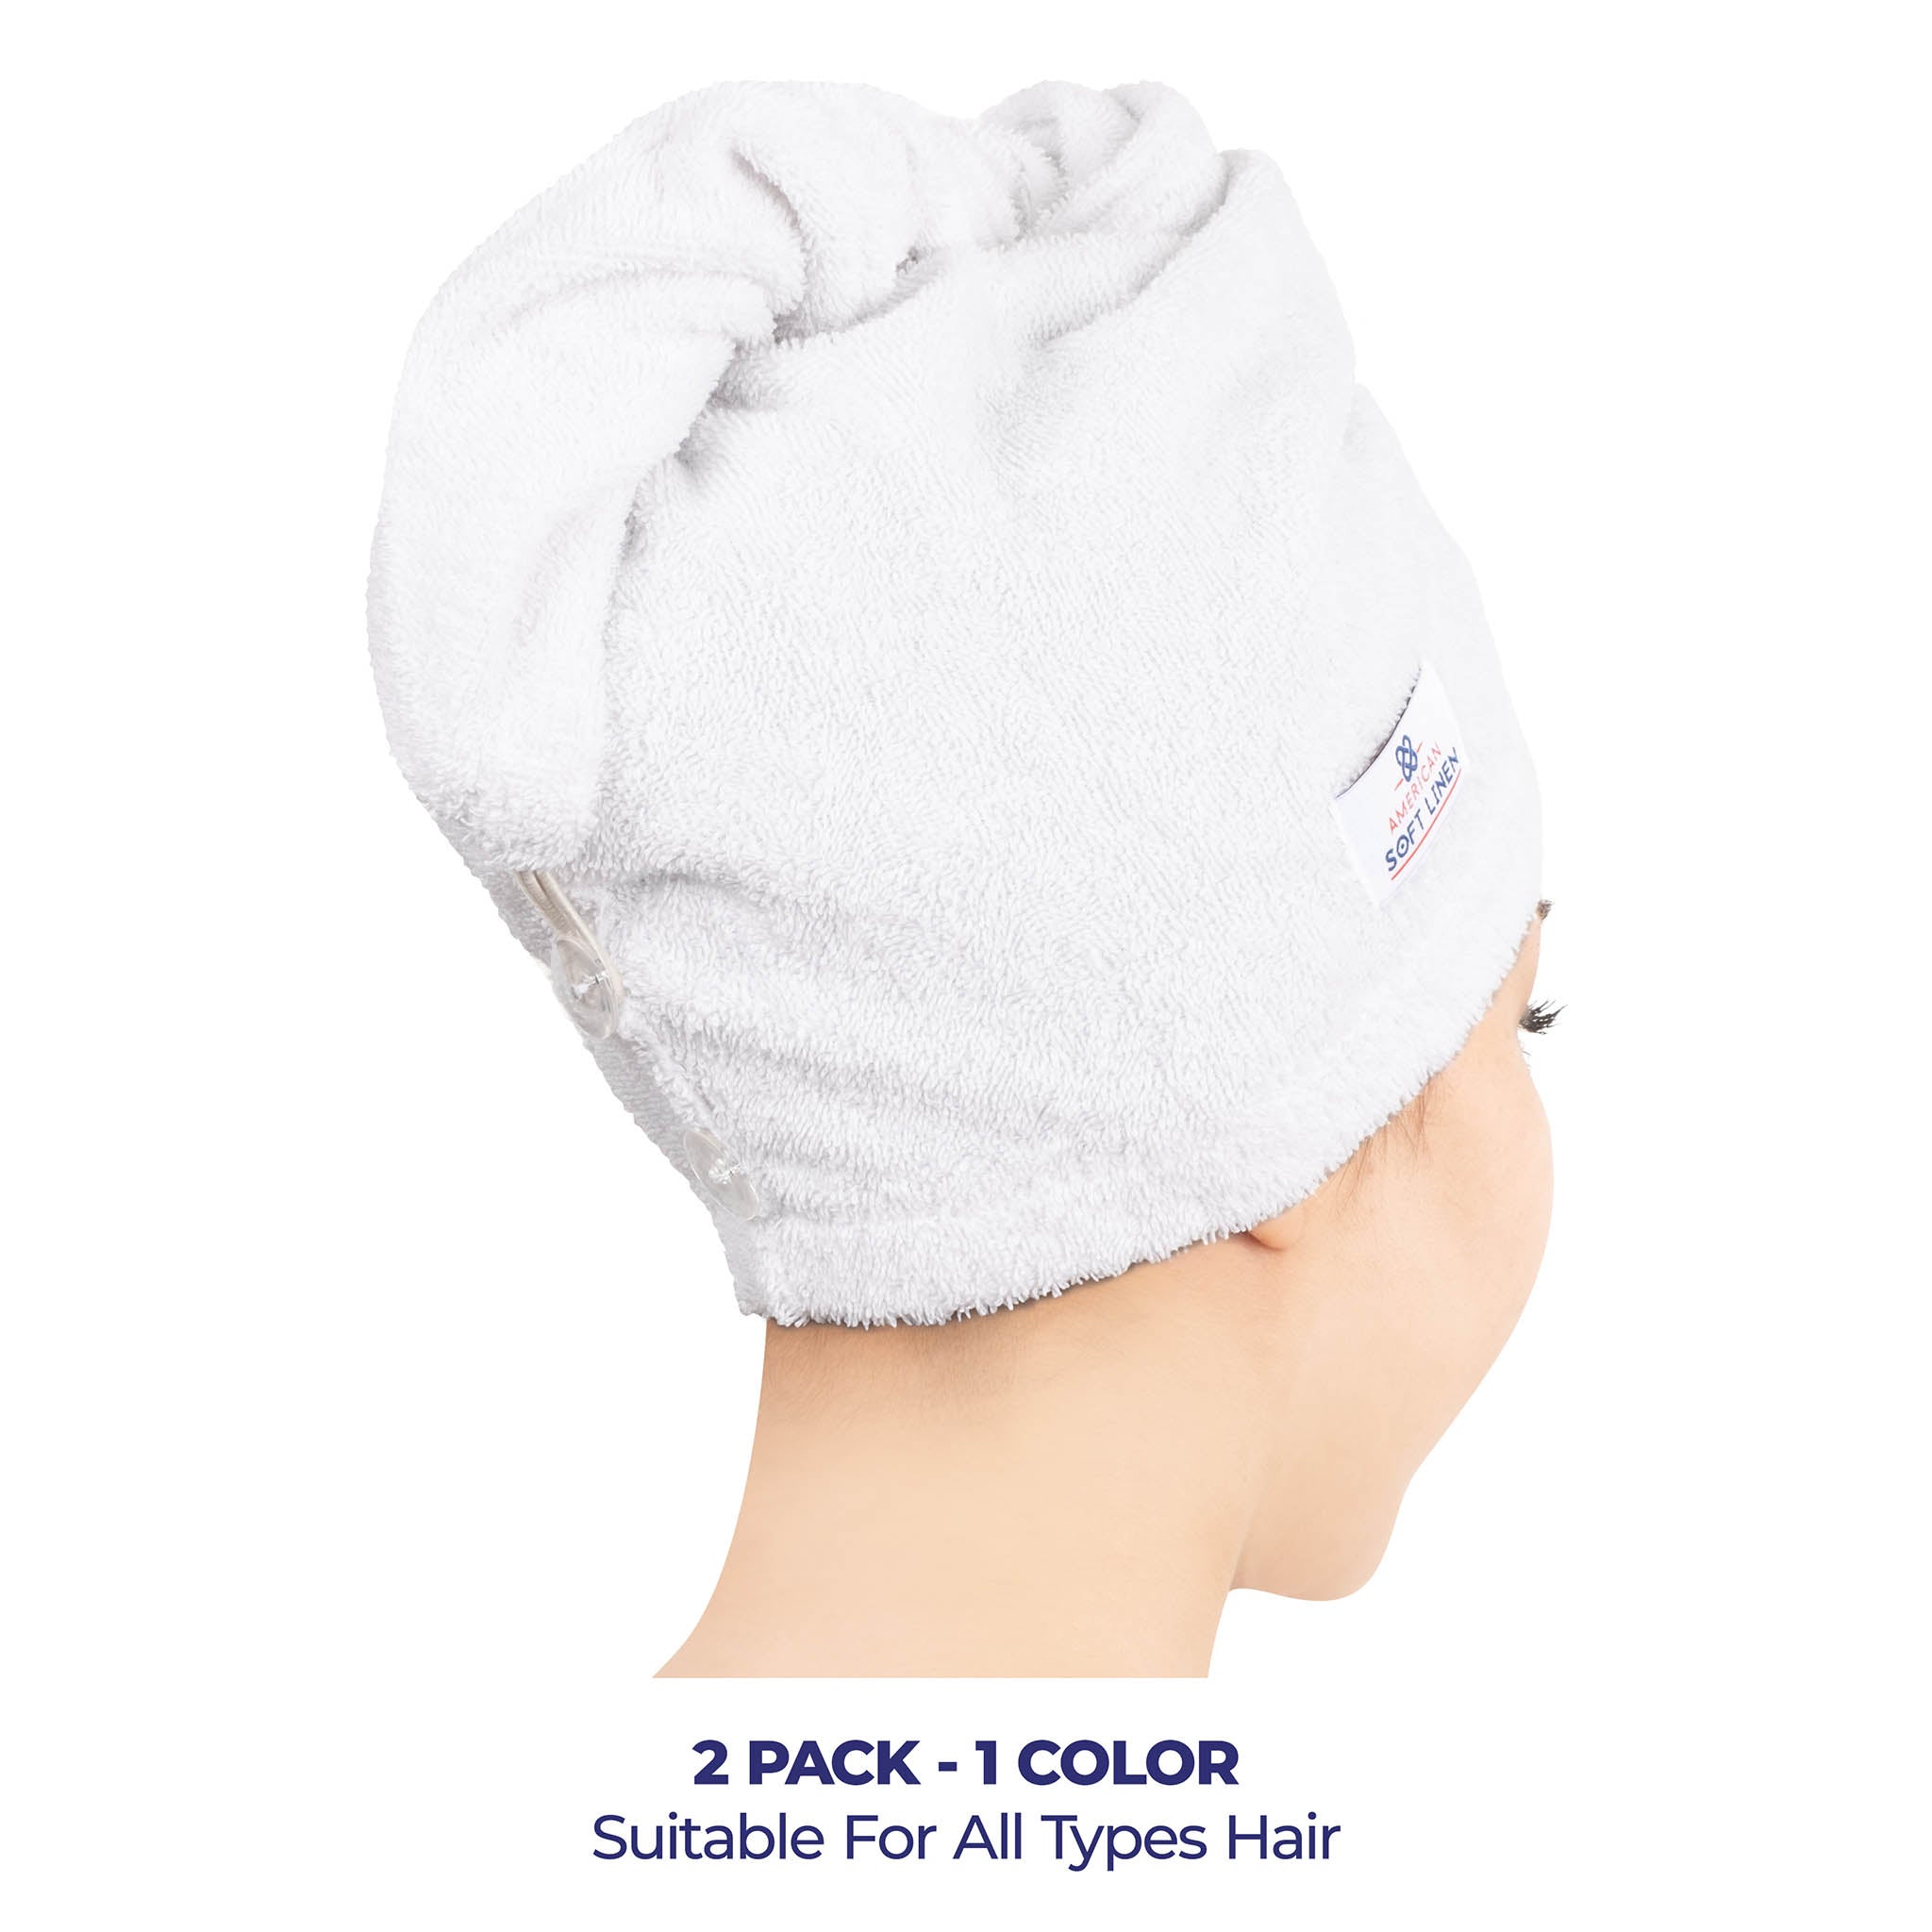 American Soft Linen 100% Cotton Hair Drying Towels for Women 2 pack 75 set case pack white-3